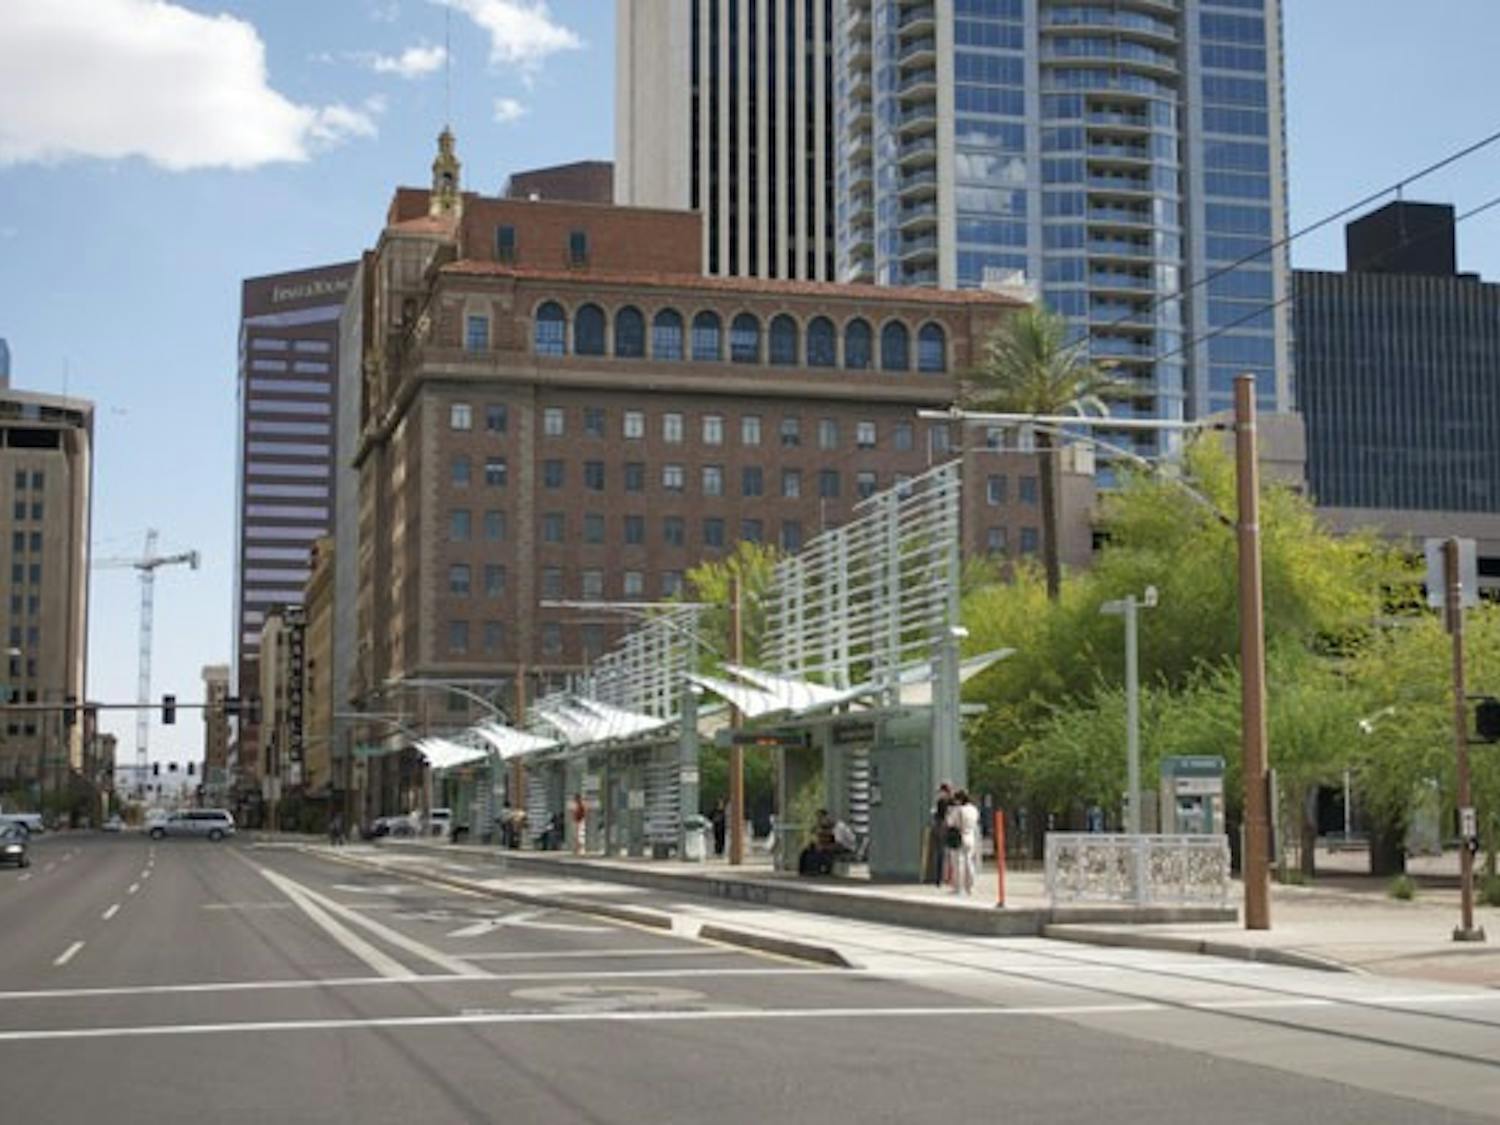 GREEN LIGHT RAILS: Energize Phoenix, which is a partnership between ASU and the city of Phoenix, are helping to make the light rail "greener". (Photo by Molly Smith)